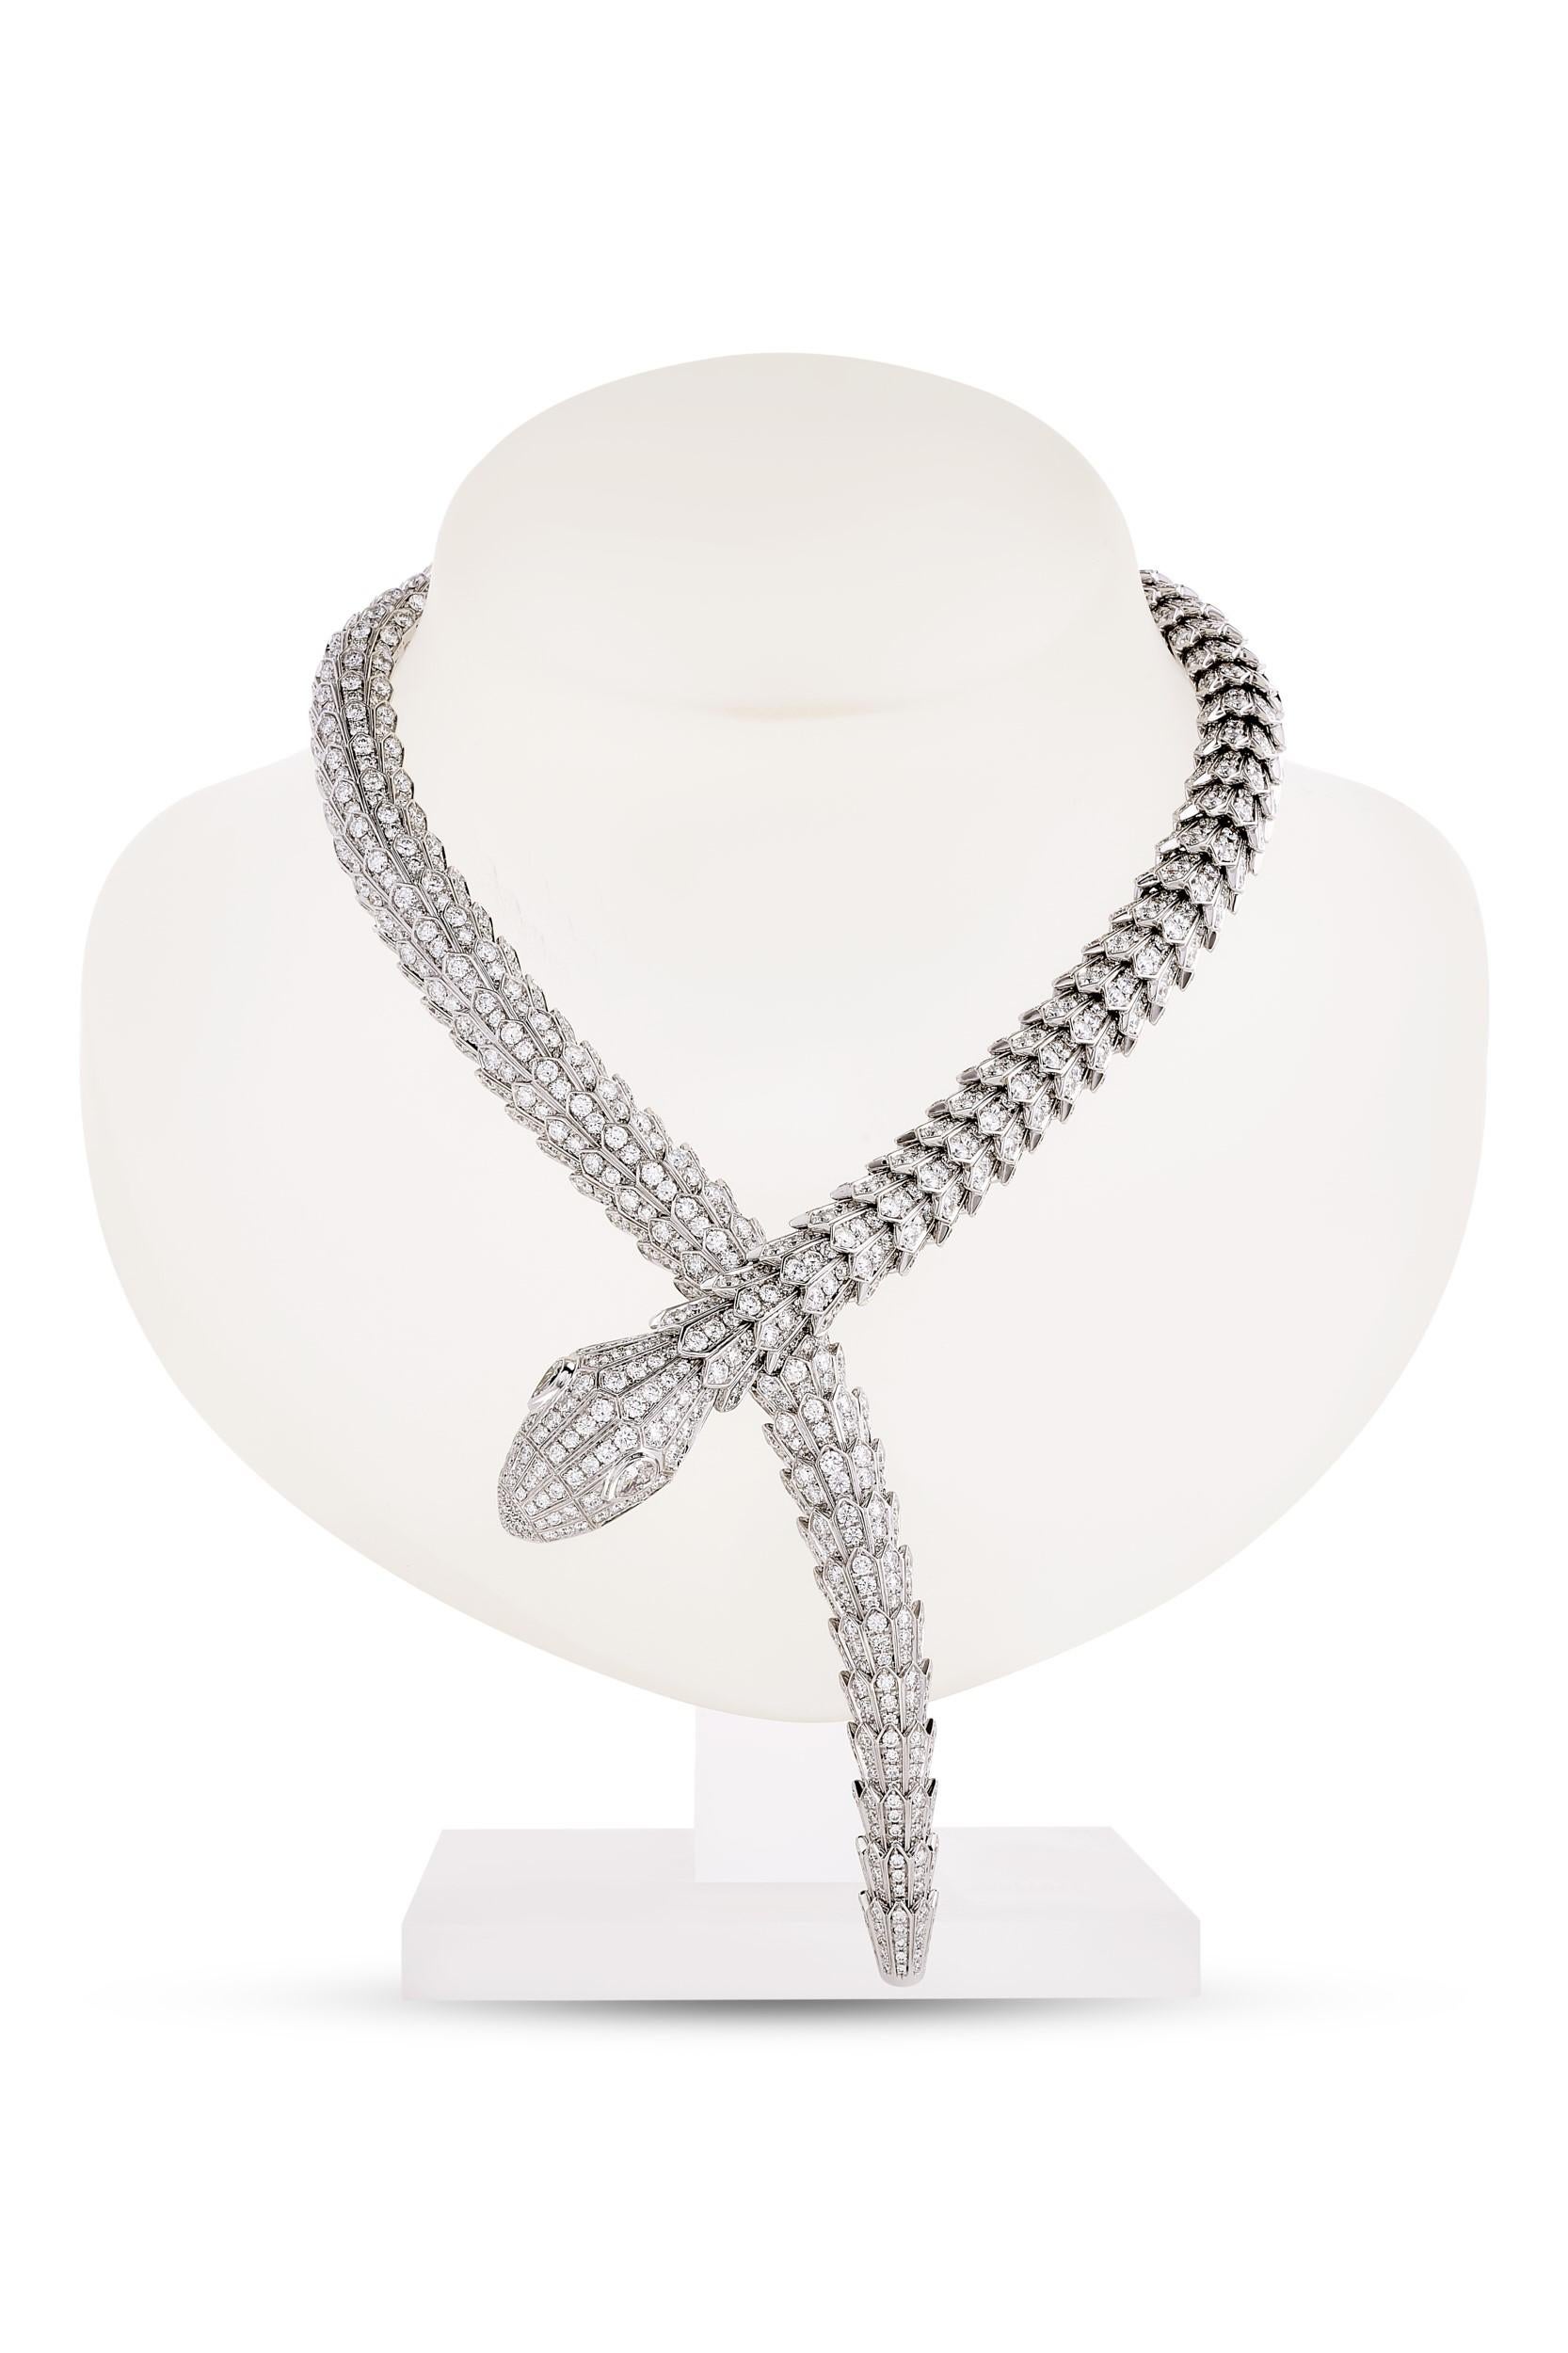 Bulgari Serpenti diamond snake necklace in 18k white gold, accompanied by Bulgari box.

This striking Bulgari Serpenti piece features approximately 73.81 carats of round brilliant cut diamonds pave set over the entirety of the necklace, as well as 2